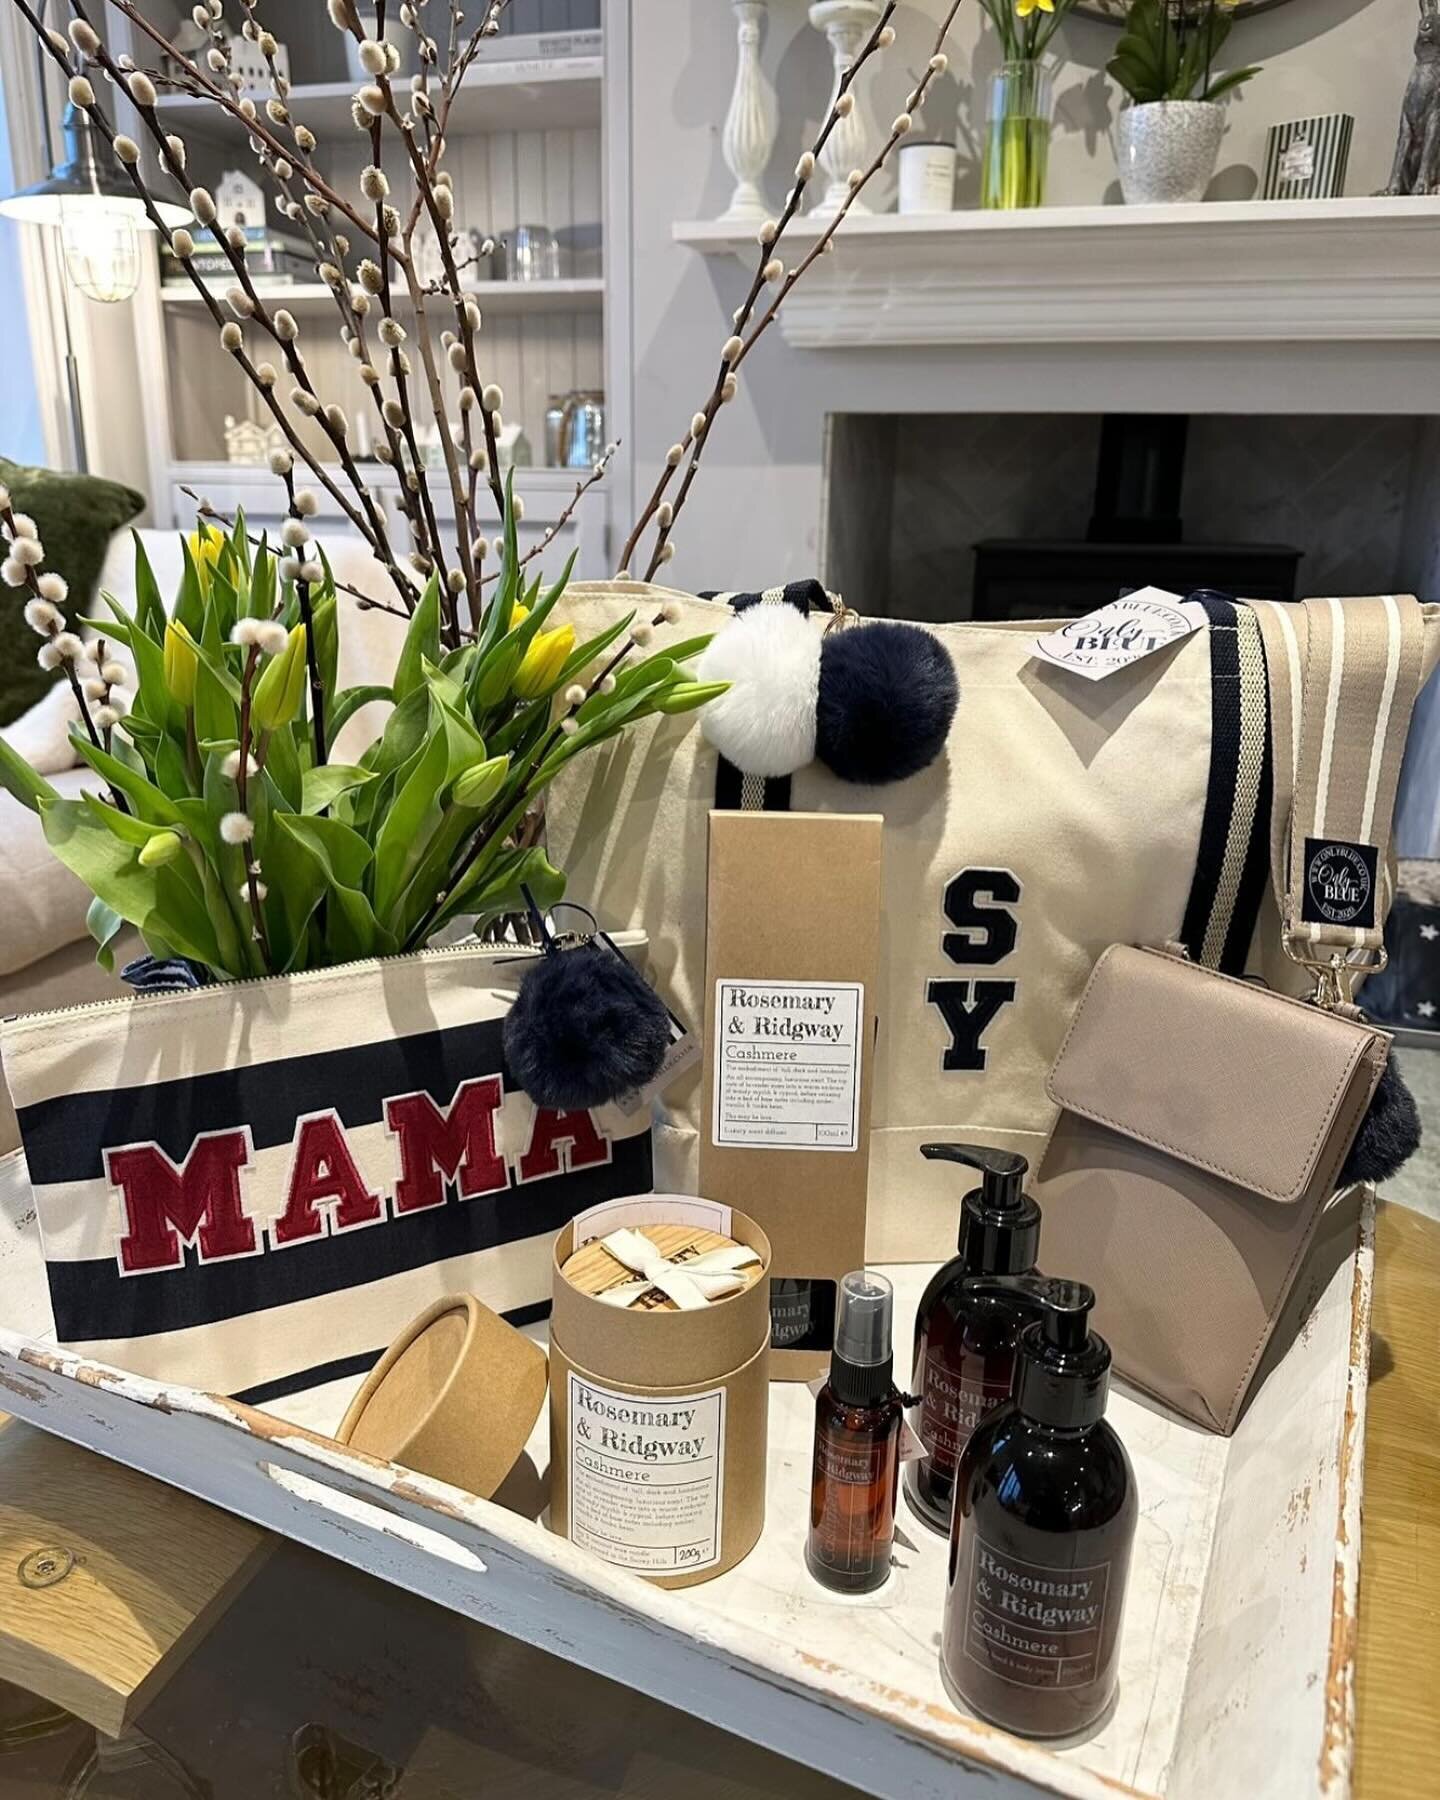 💙💙💙It&rsquo;s Competition time ! 💙💙💙

We&rsquo;ve teamed up with the lovely Serena 
@ourclapboardhomebythesea To bring you the most fabulous Mother&rsquo;s Day competition. 
You&rsquo;ll get the chance to win some really fabulous goodies from O